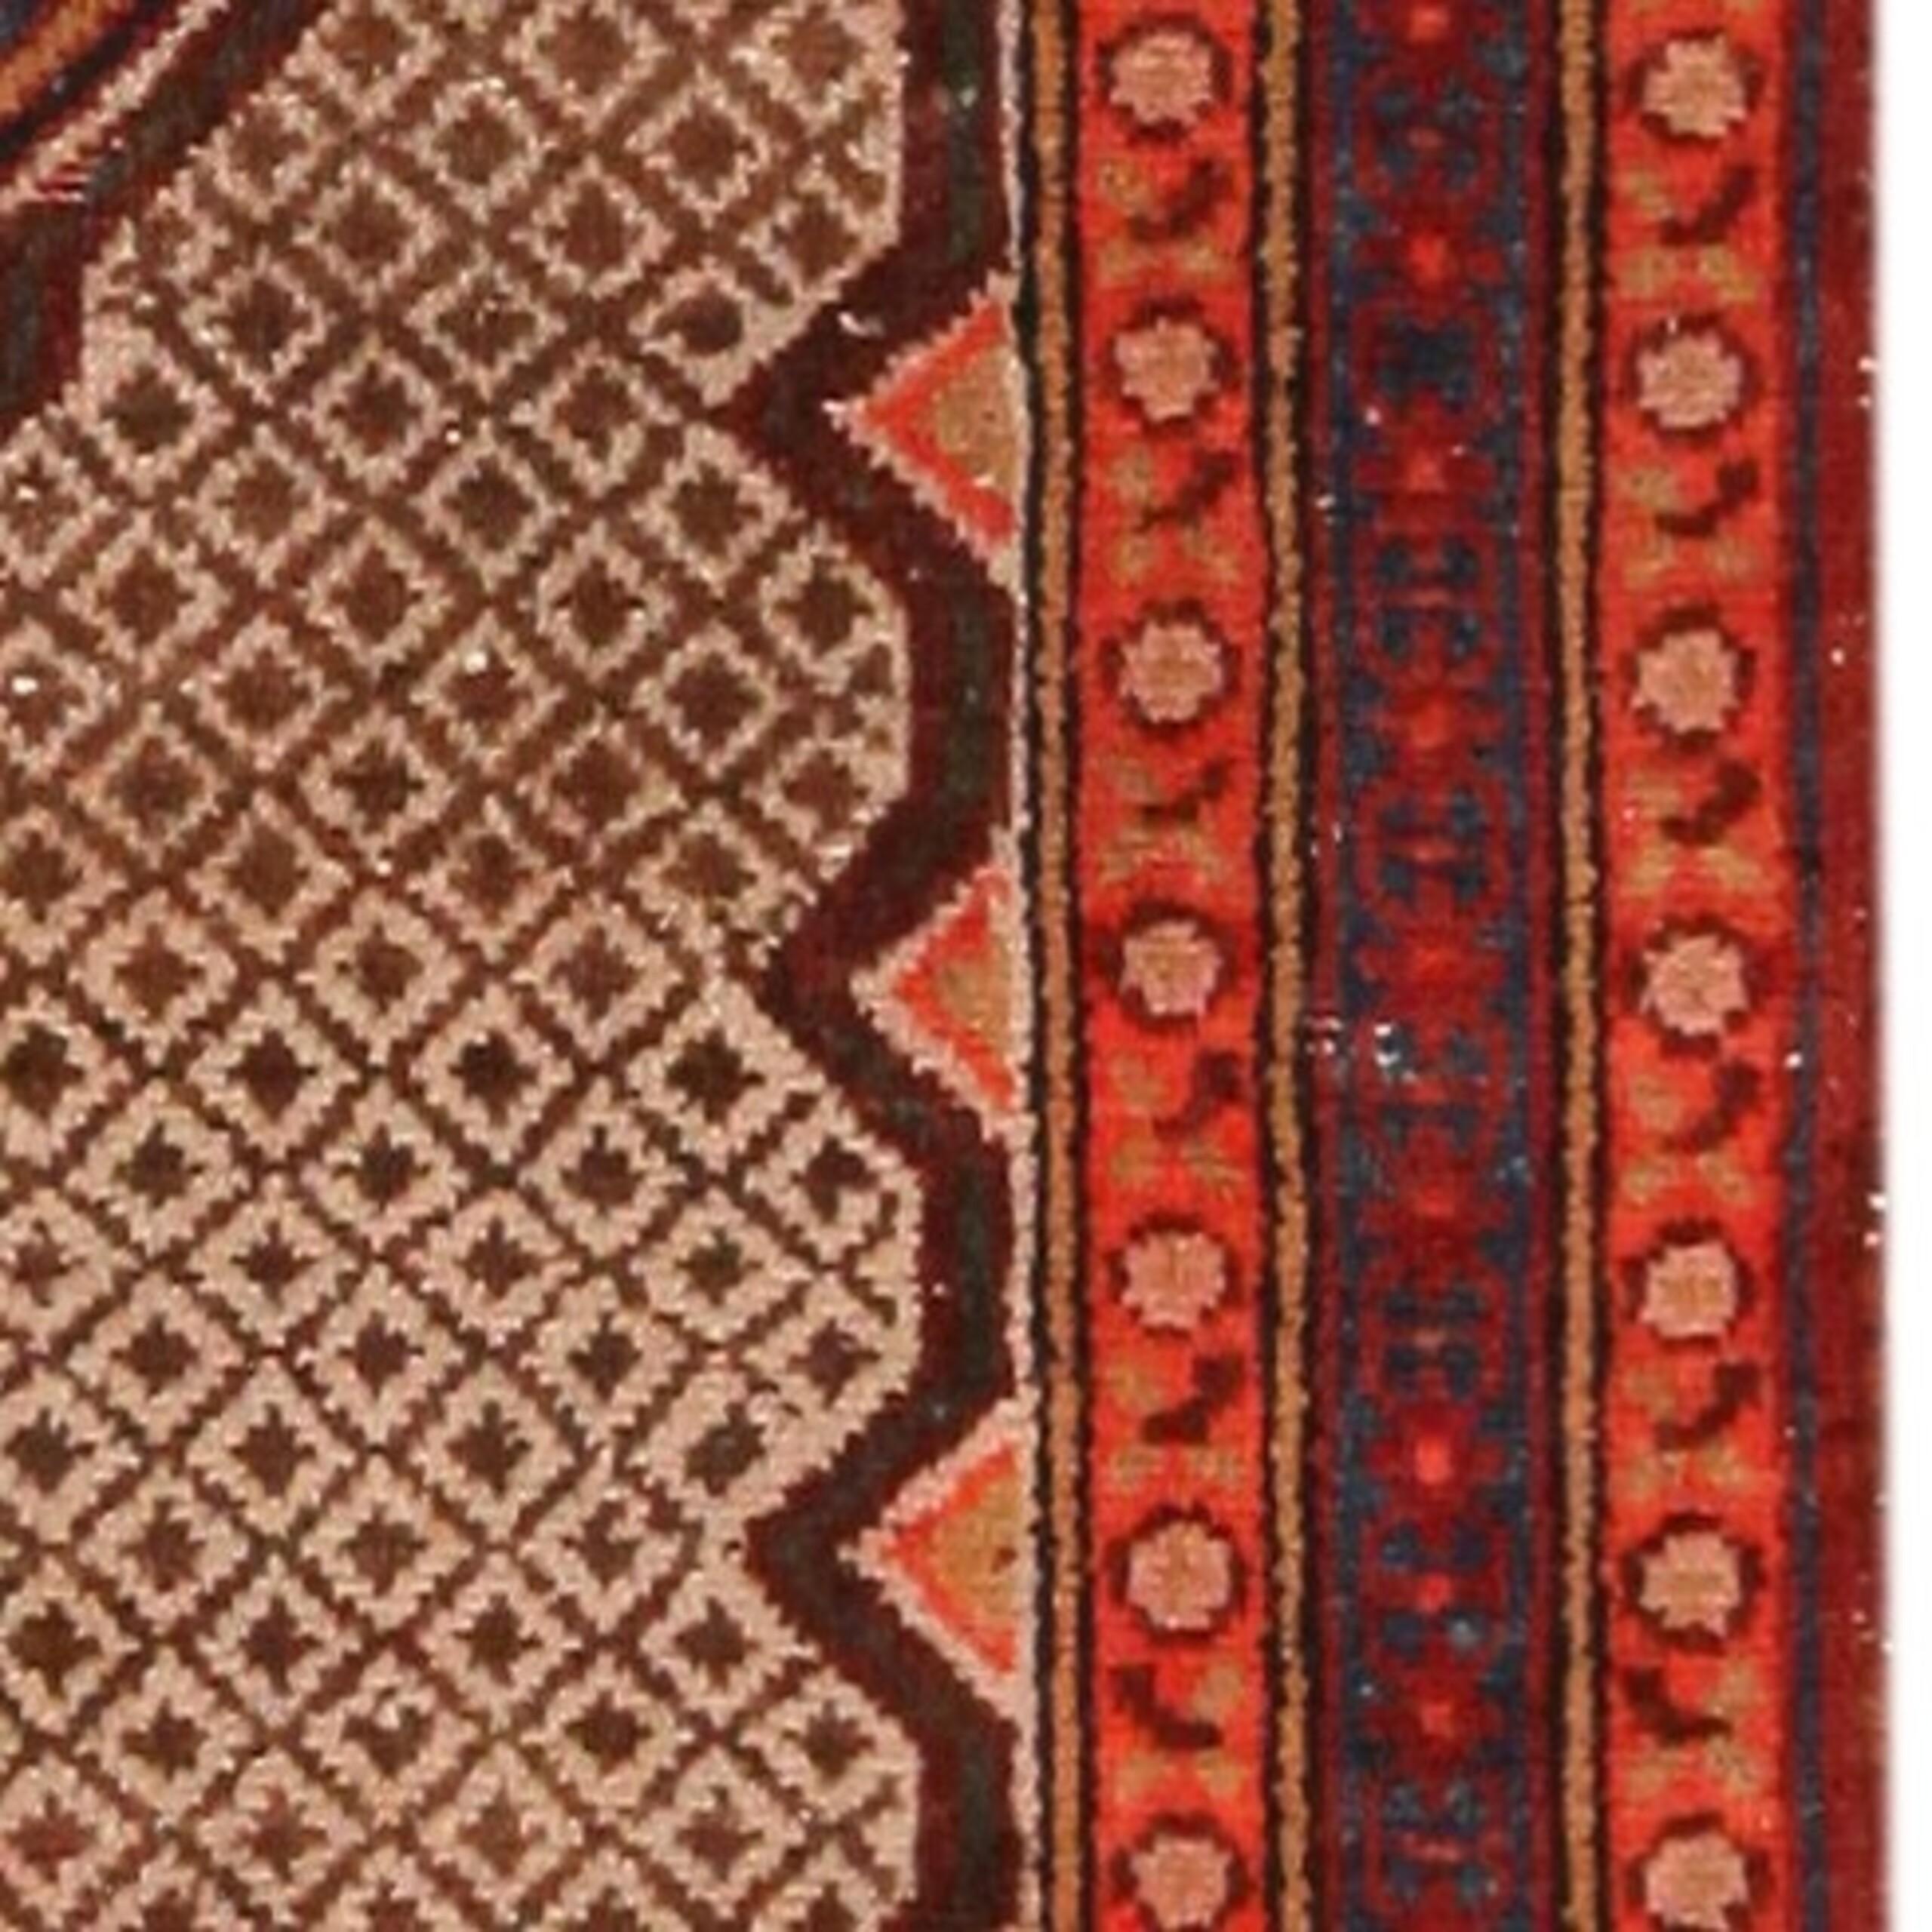 Nazmiyal Collection Antique Persian Serab Area Rug, Country of origin: Persian rug, Circa date: 1920. Size: 2 ft 5 in x 3 ft x 4 in (0.73 m x 1.01 m)

